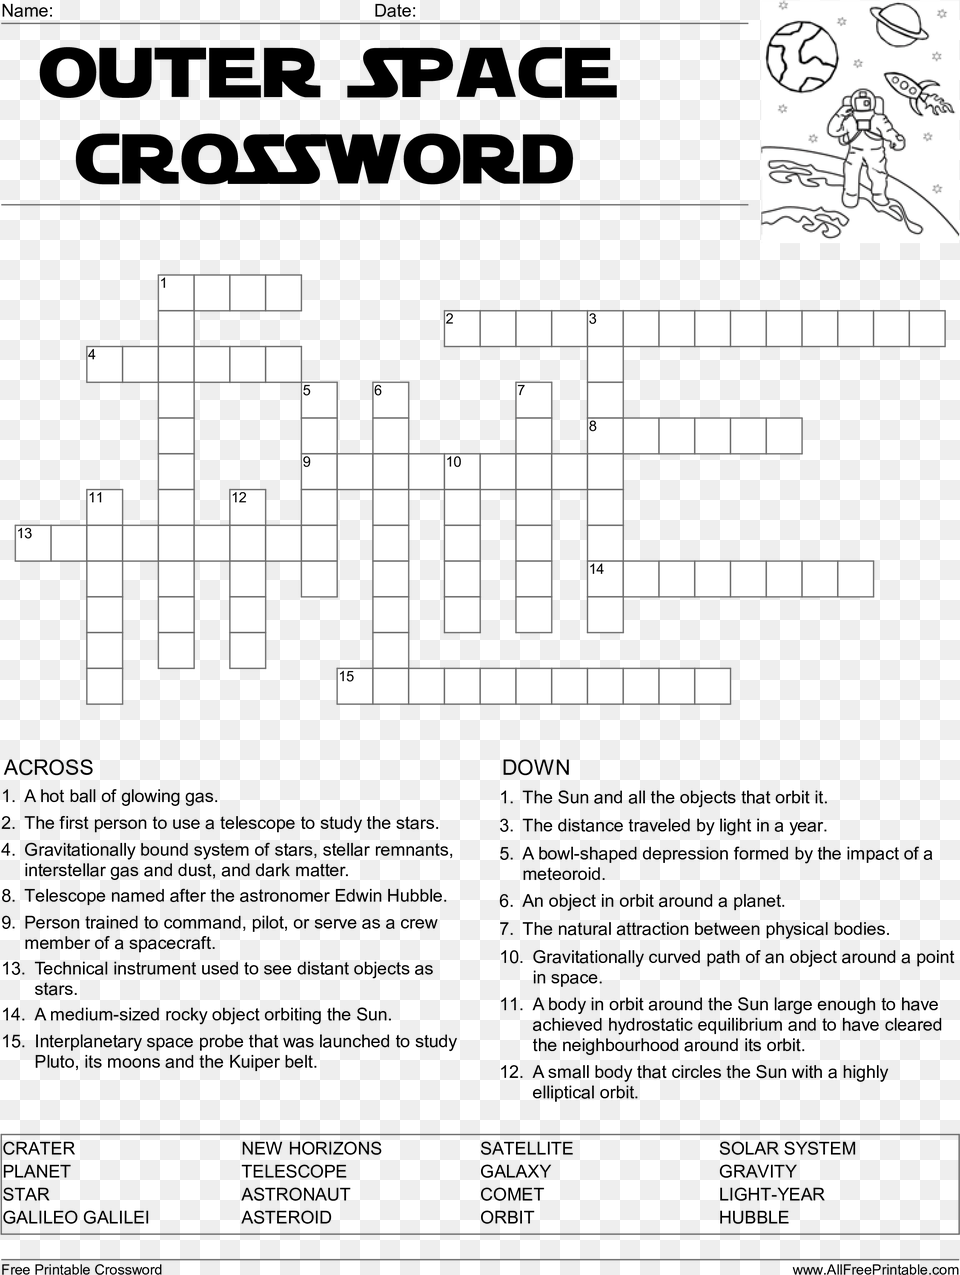 Crossword Puzzle Printable Template Crosswords Lovely Printable Star Wars Crossword For Kids, Game, Person, Crossword Puzzle Free Png Download